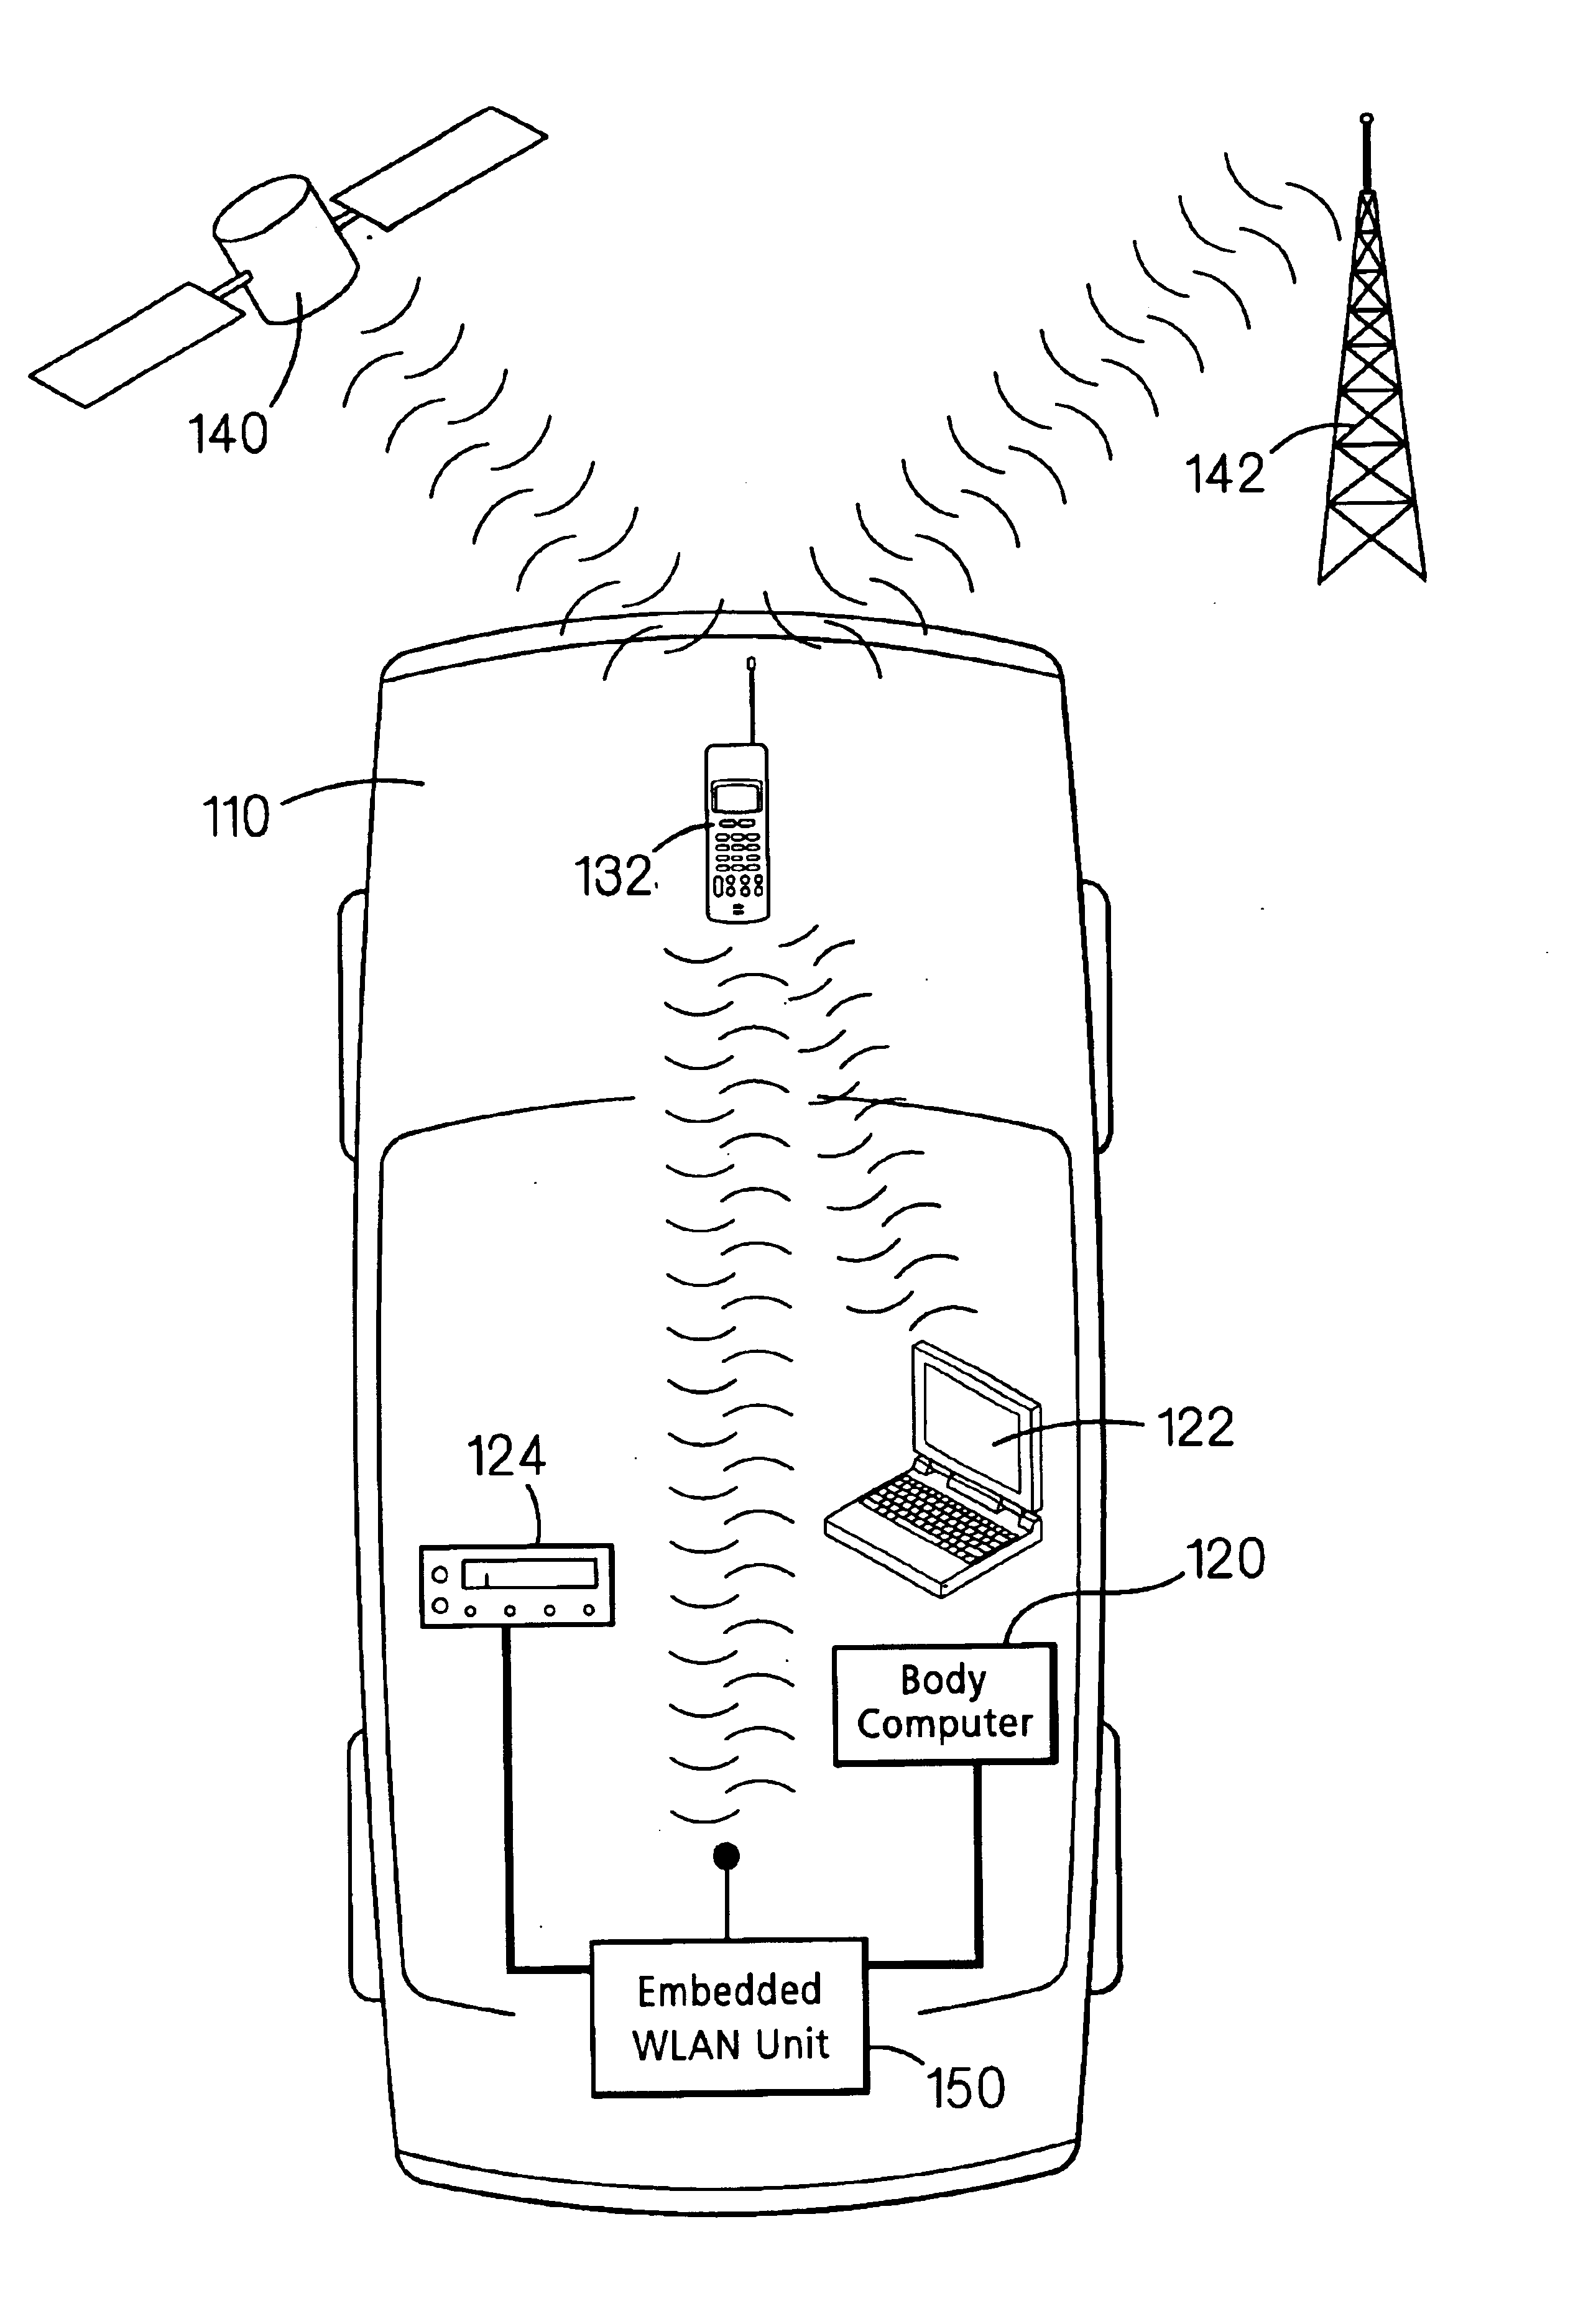 In-vehicle wireless local area network